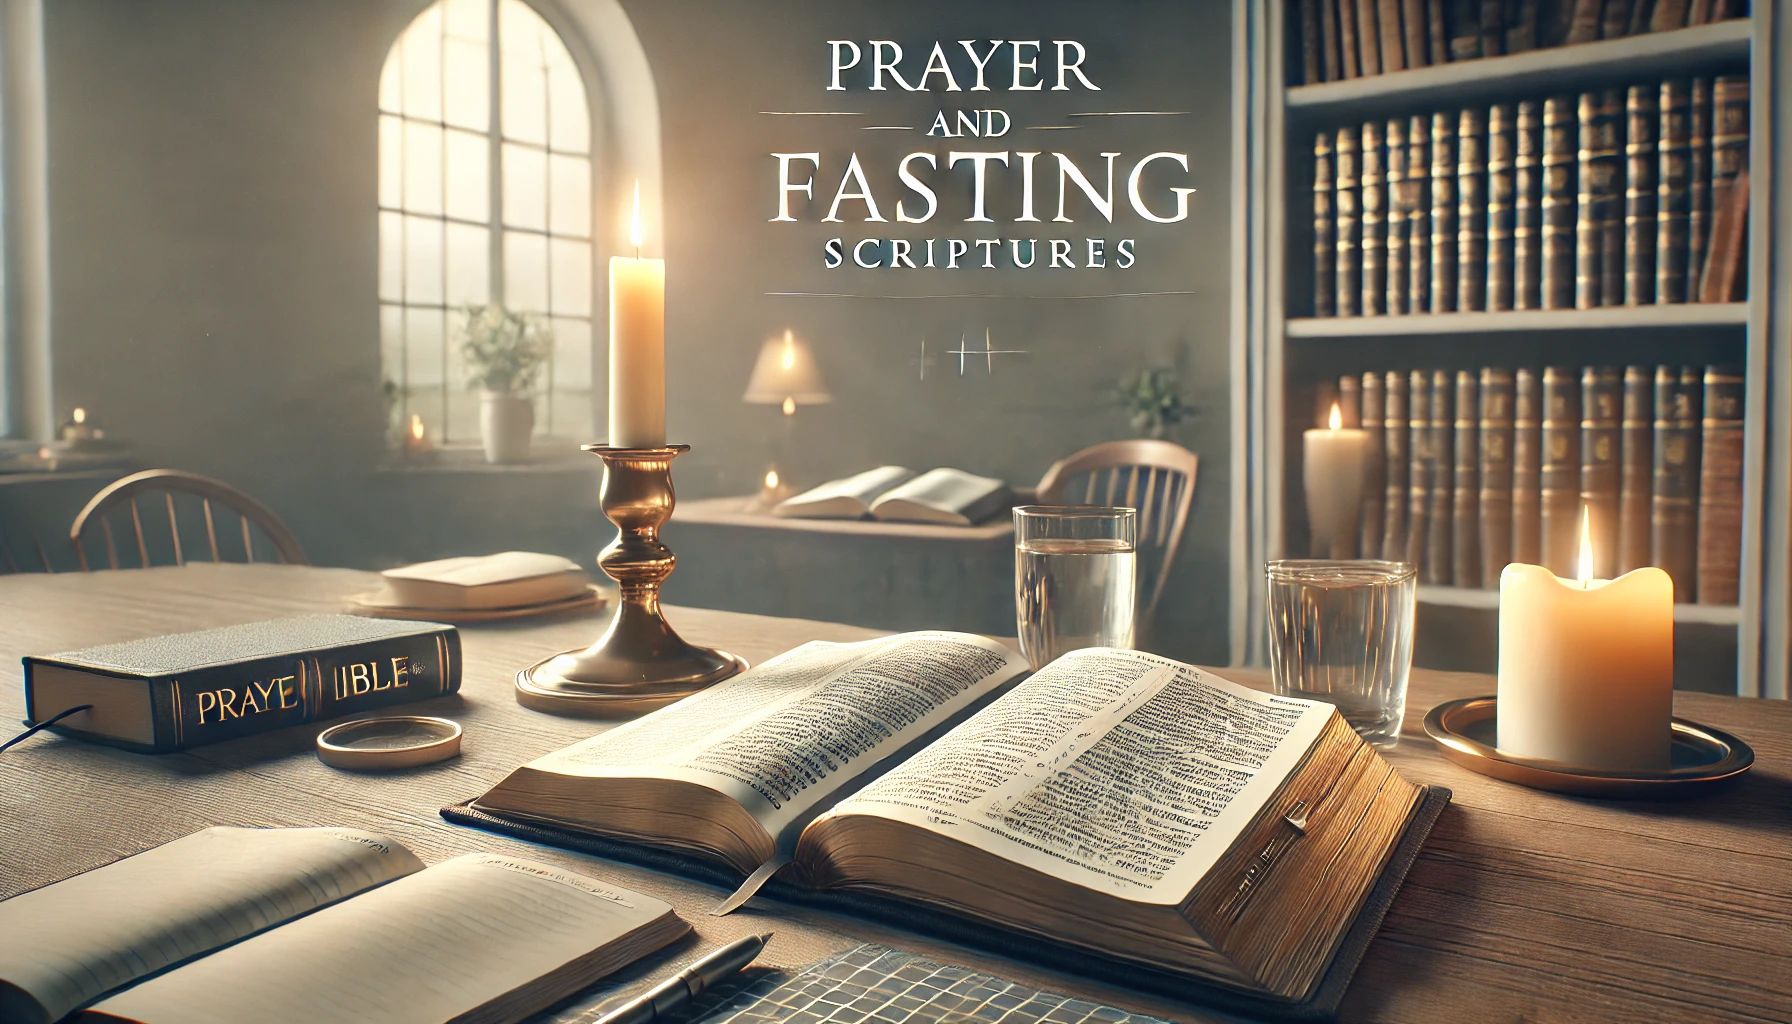 20 Prayer And Fasting Scriptures